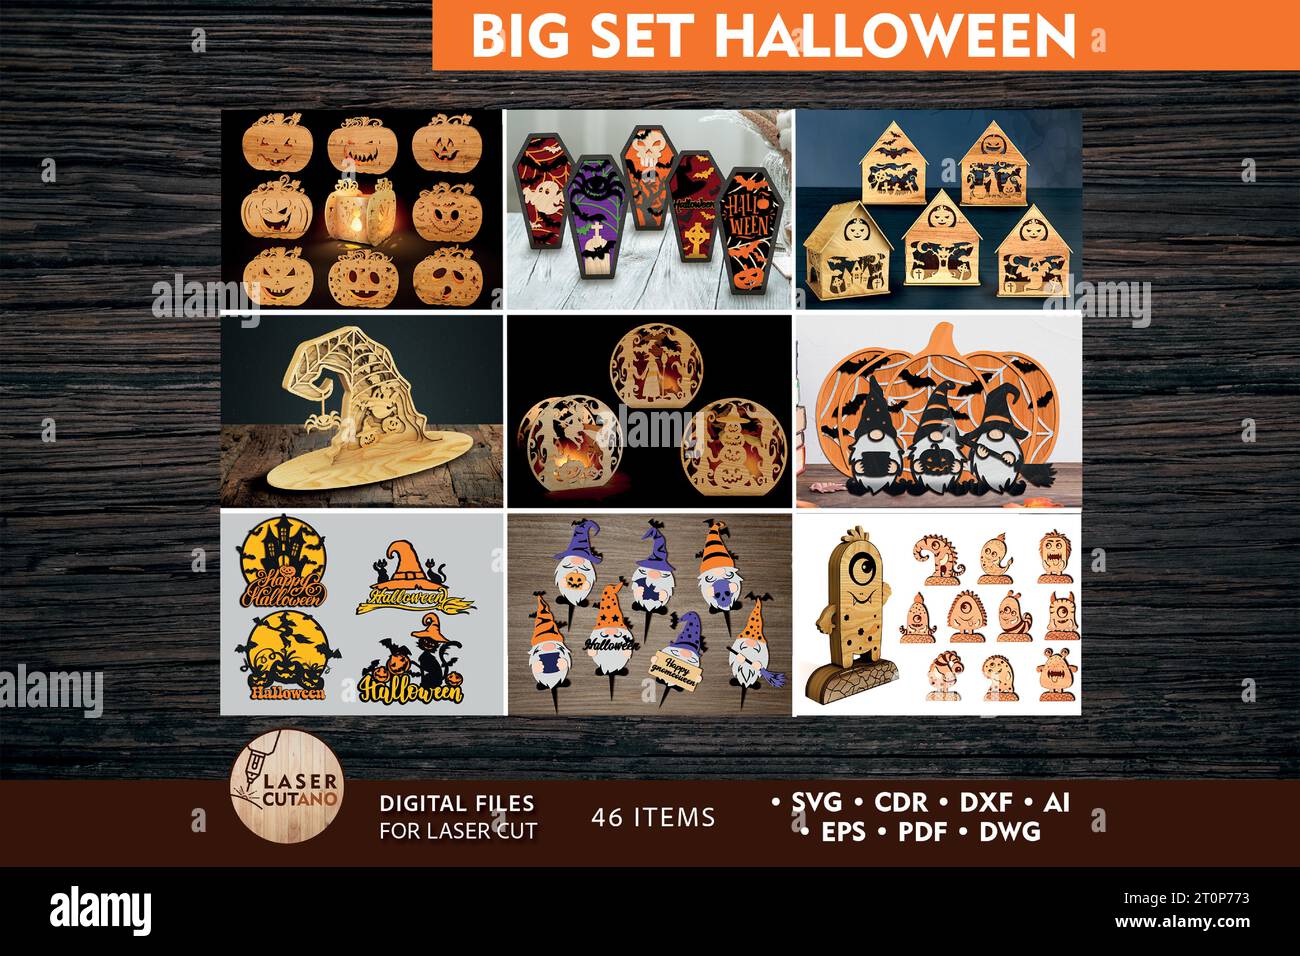 HALLOWEEN Set It is a Bundle of laser cut files, which are digital files that are used to create designs or patterns using a laser cutter machine. Stock Vector